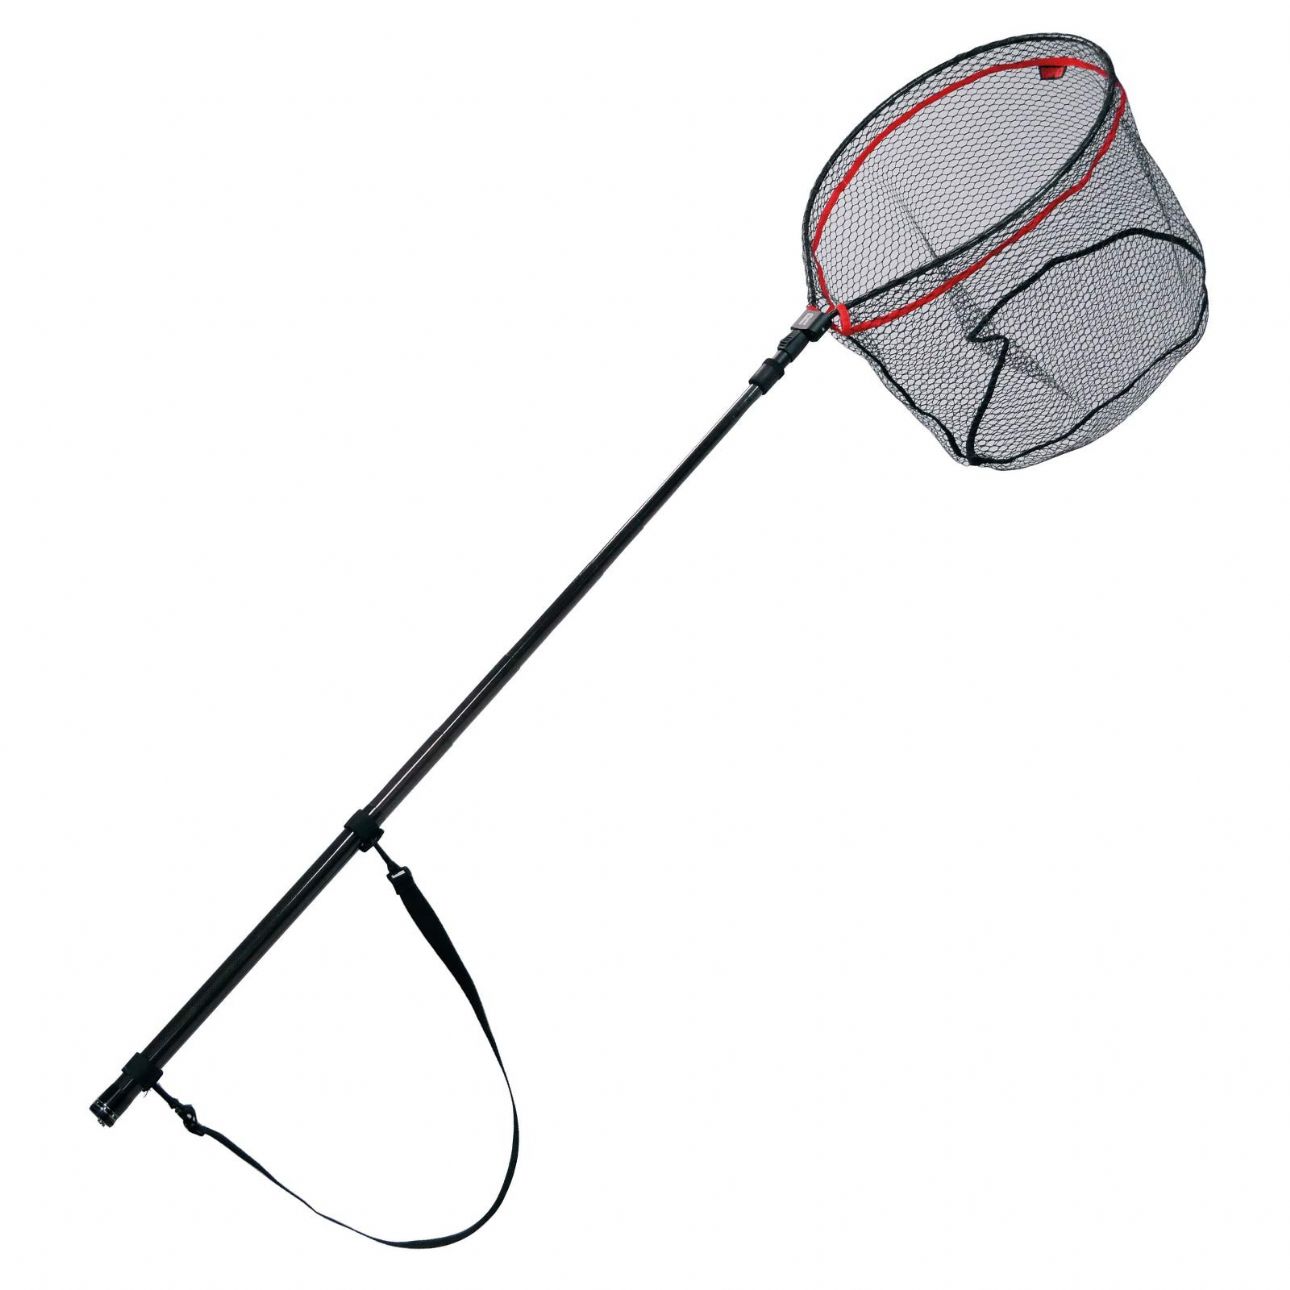 Rapala Karbon Jetty Net with Telescopic Handle from